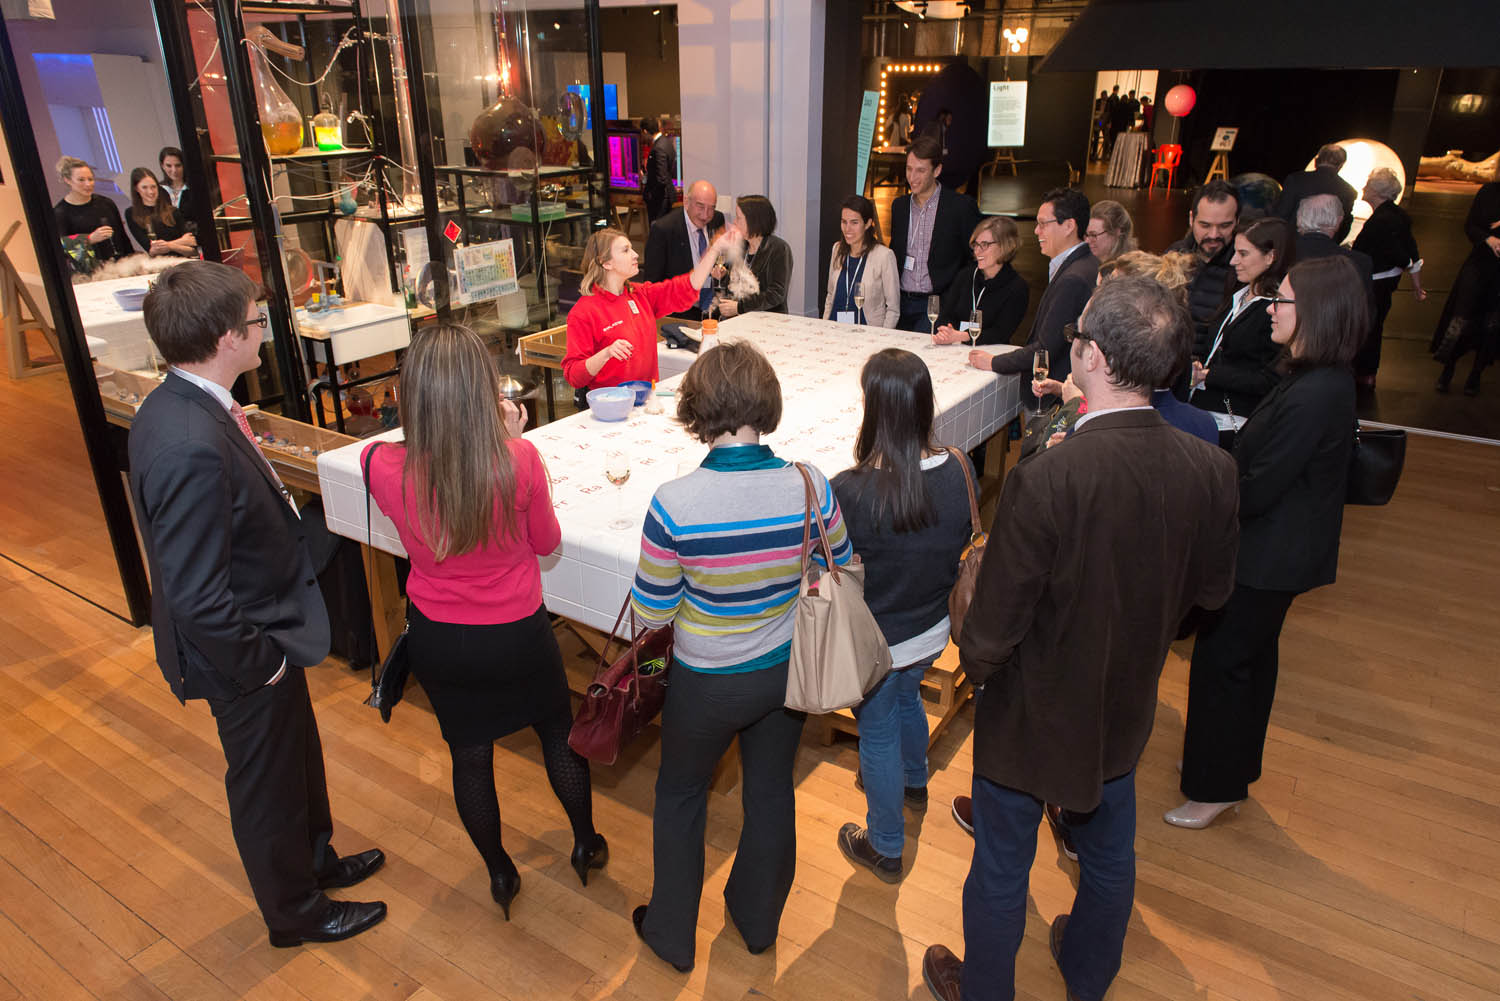 Guests being given a demonstration at the Chemistry Bar by Science Museum Explainer Phoebe.